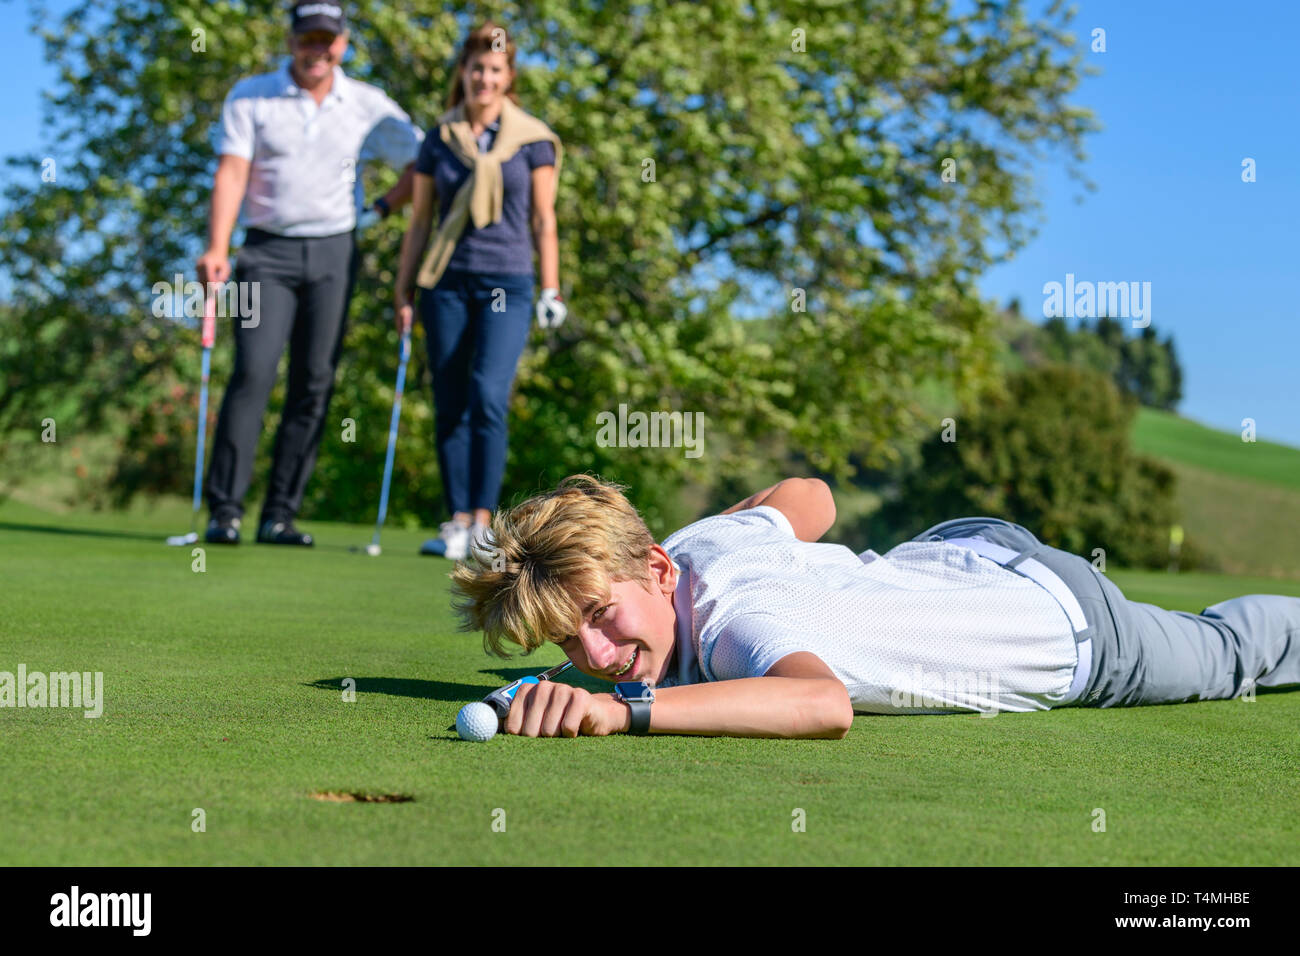 Unconventional putting - young golfer putting ball like a billiard player Stock Photo